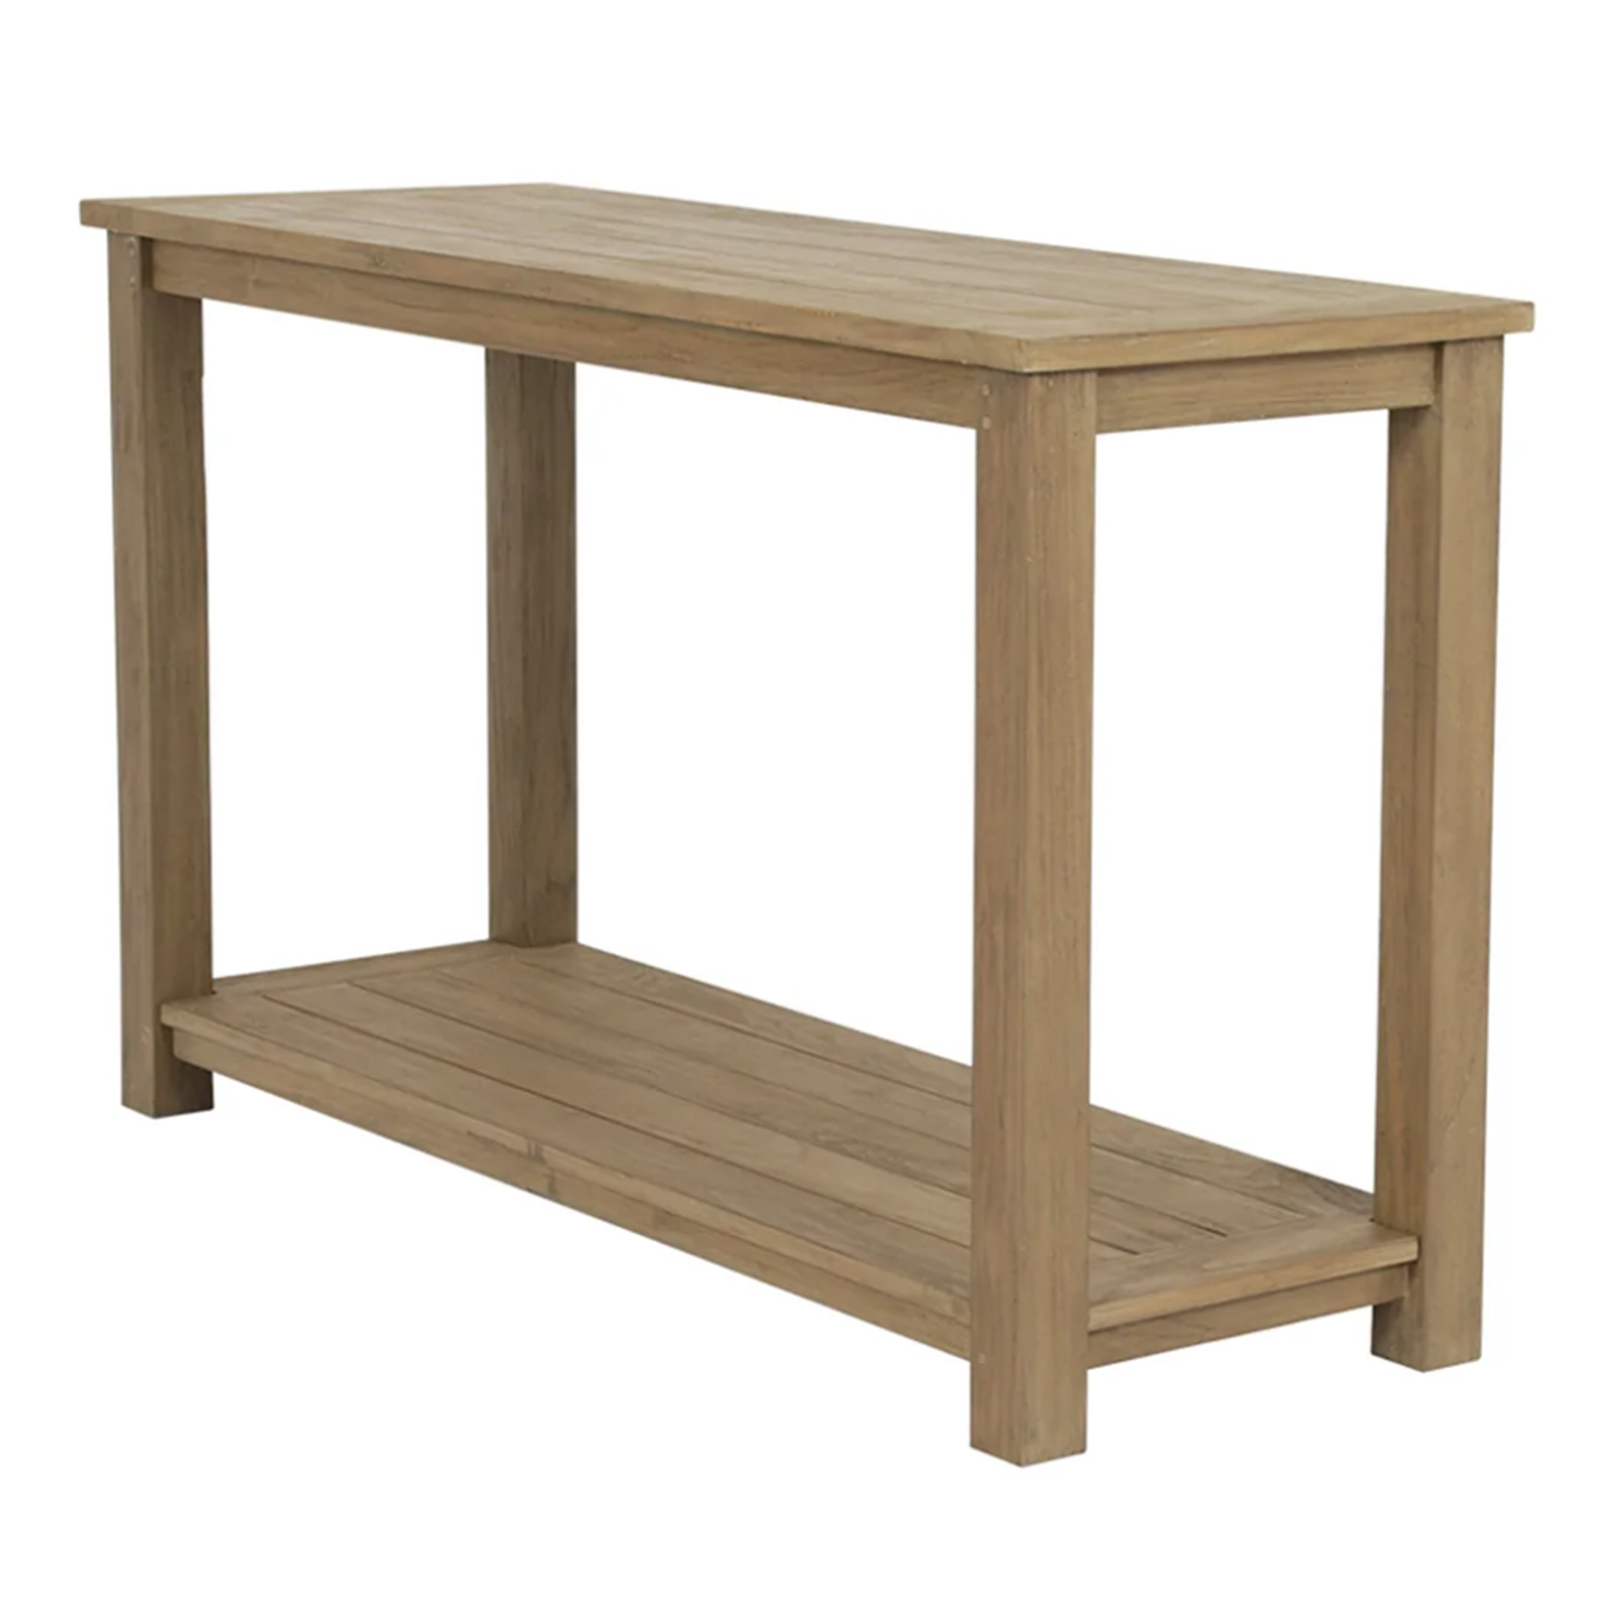 Solange Outdoor Sofa Table